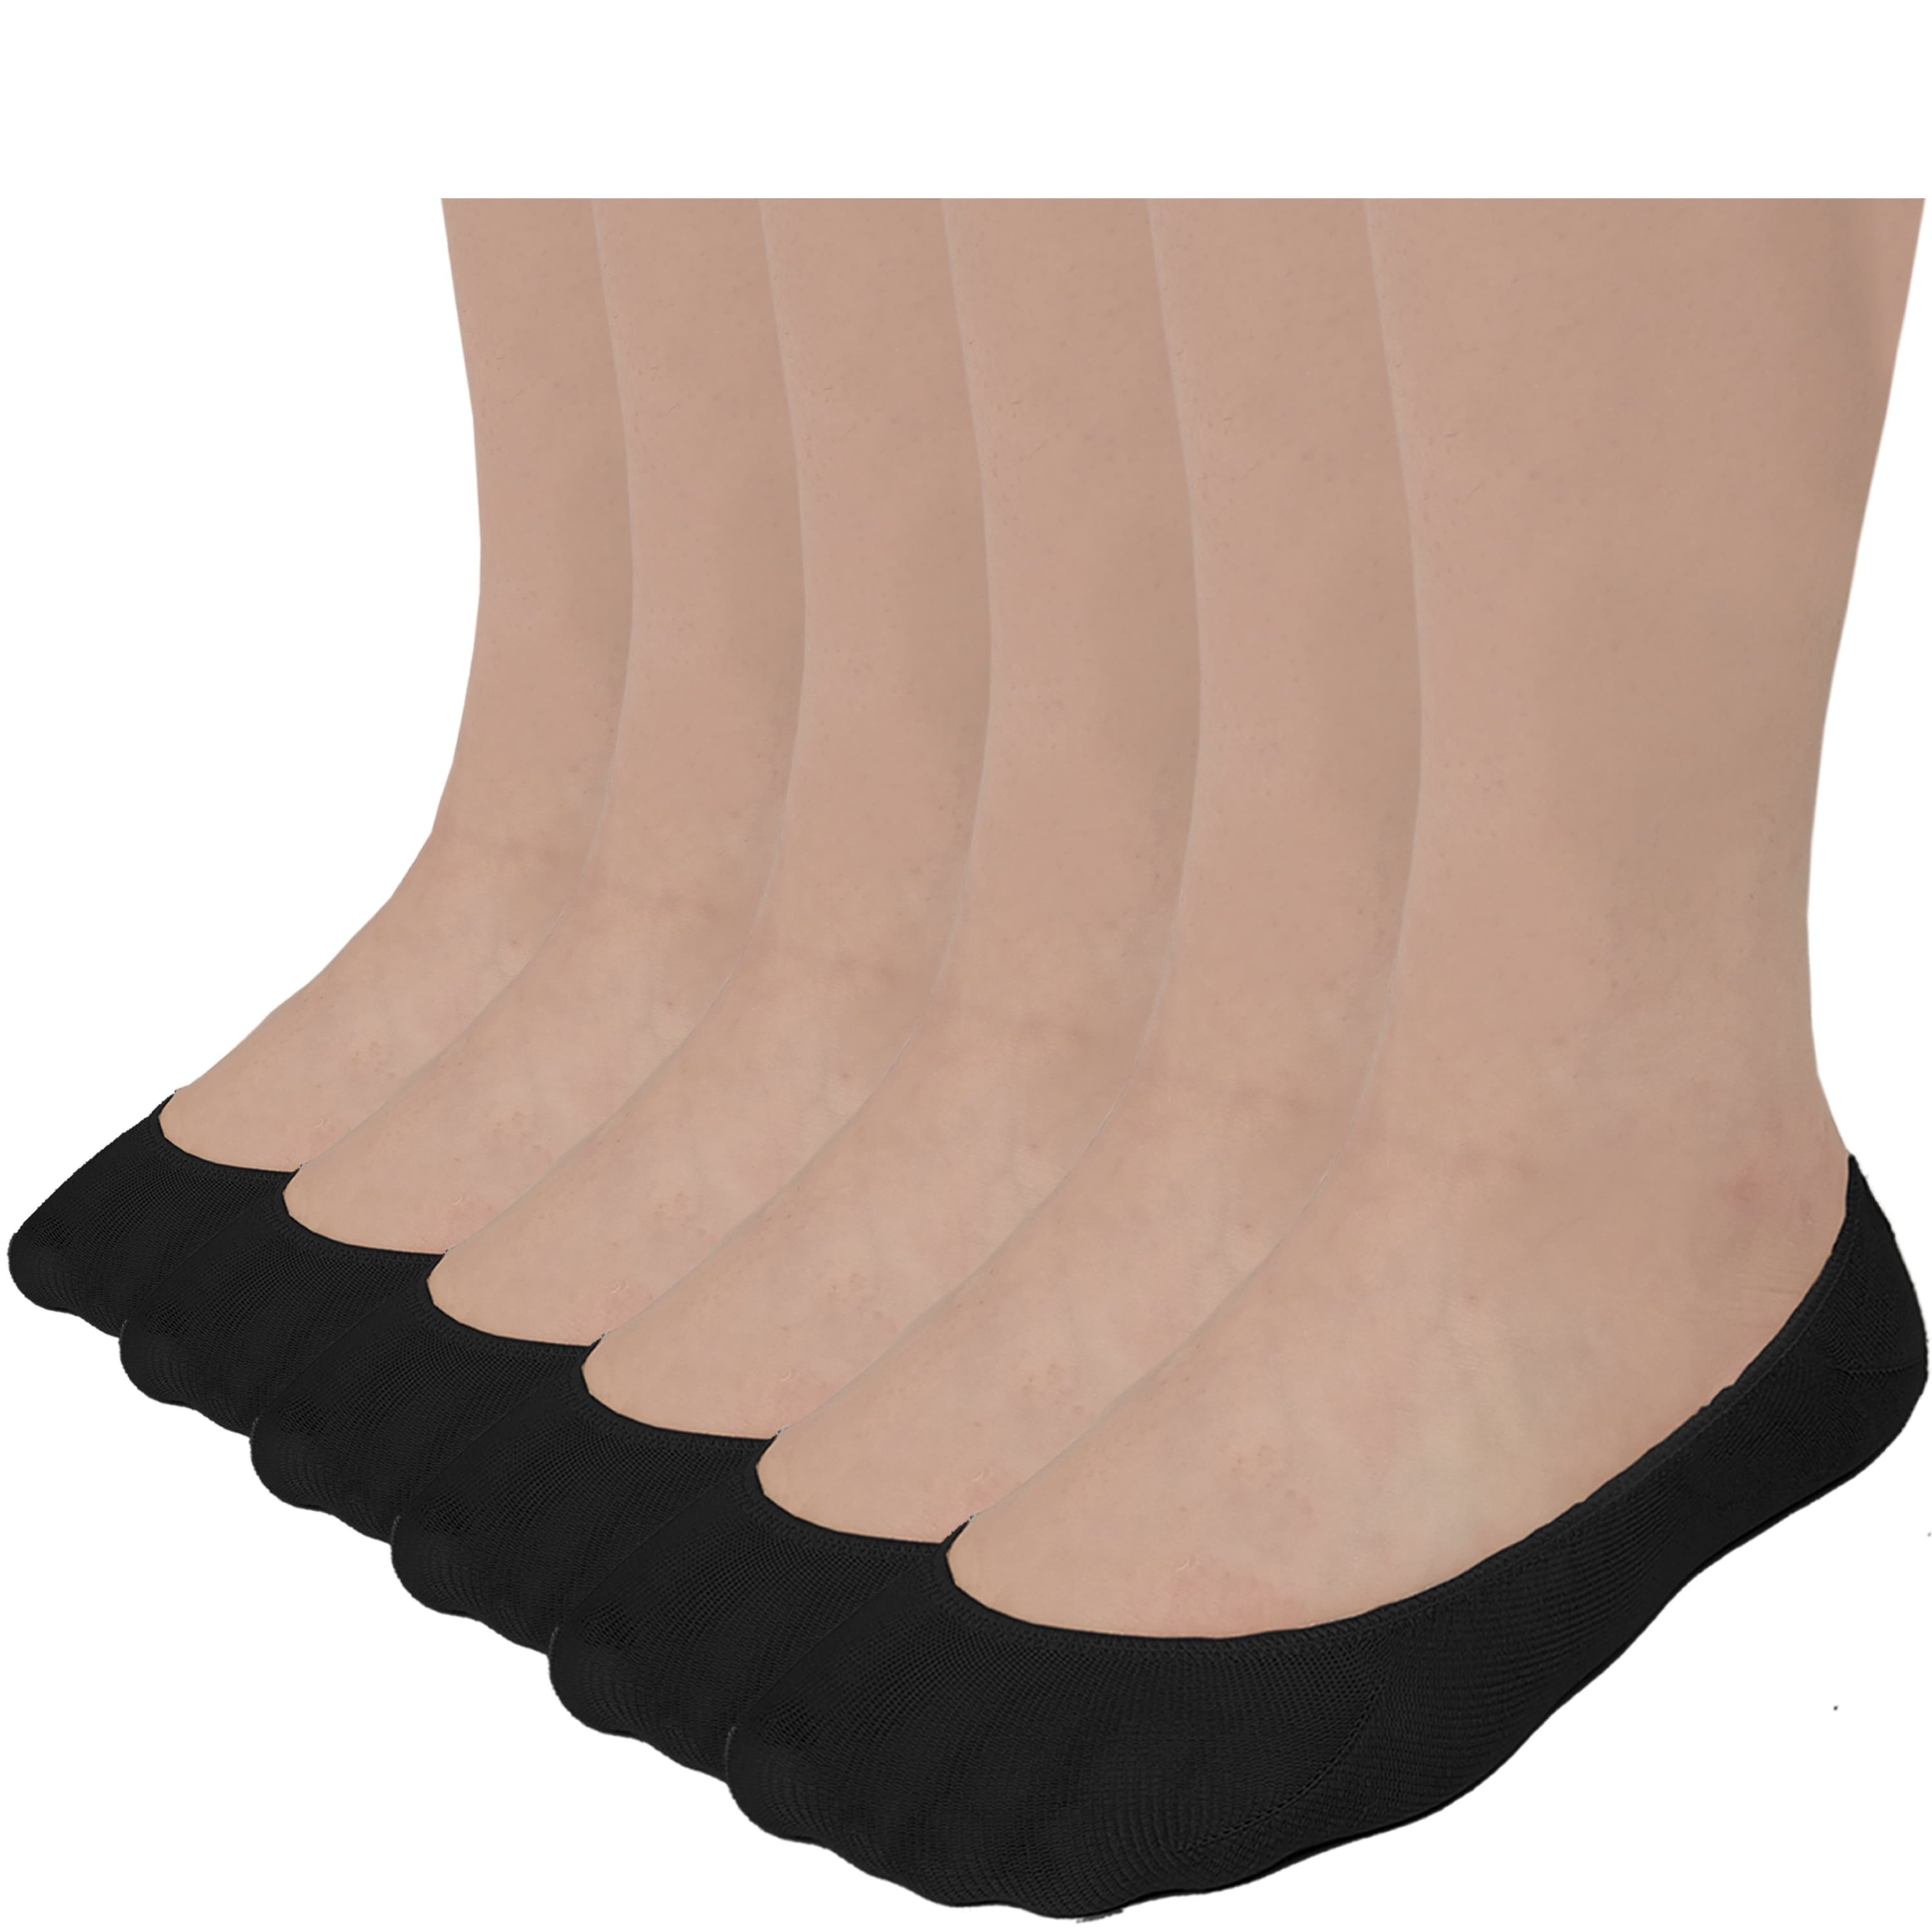 Foot Socks Assorted Colors in 6 & 12 Pairs Low Cut Ballet Flats 